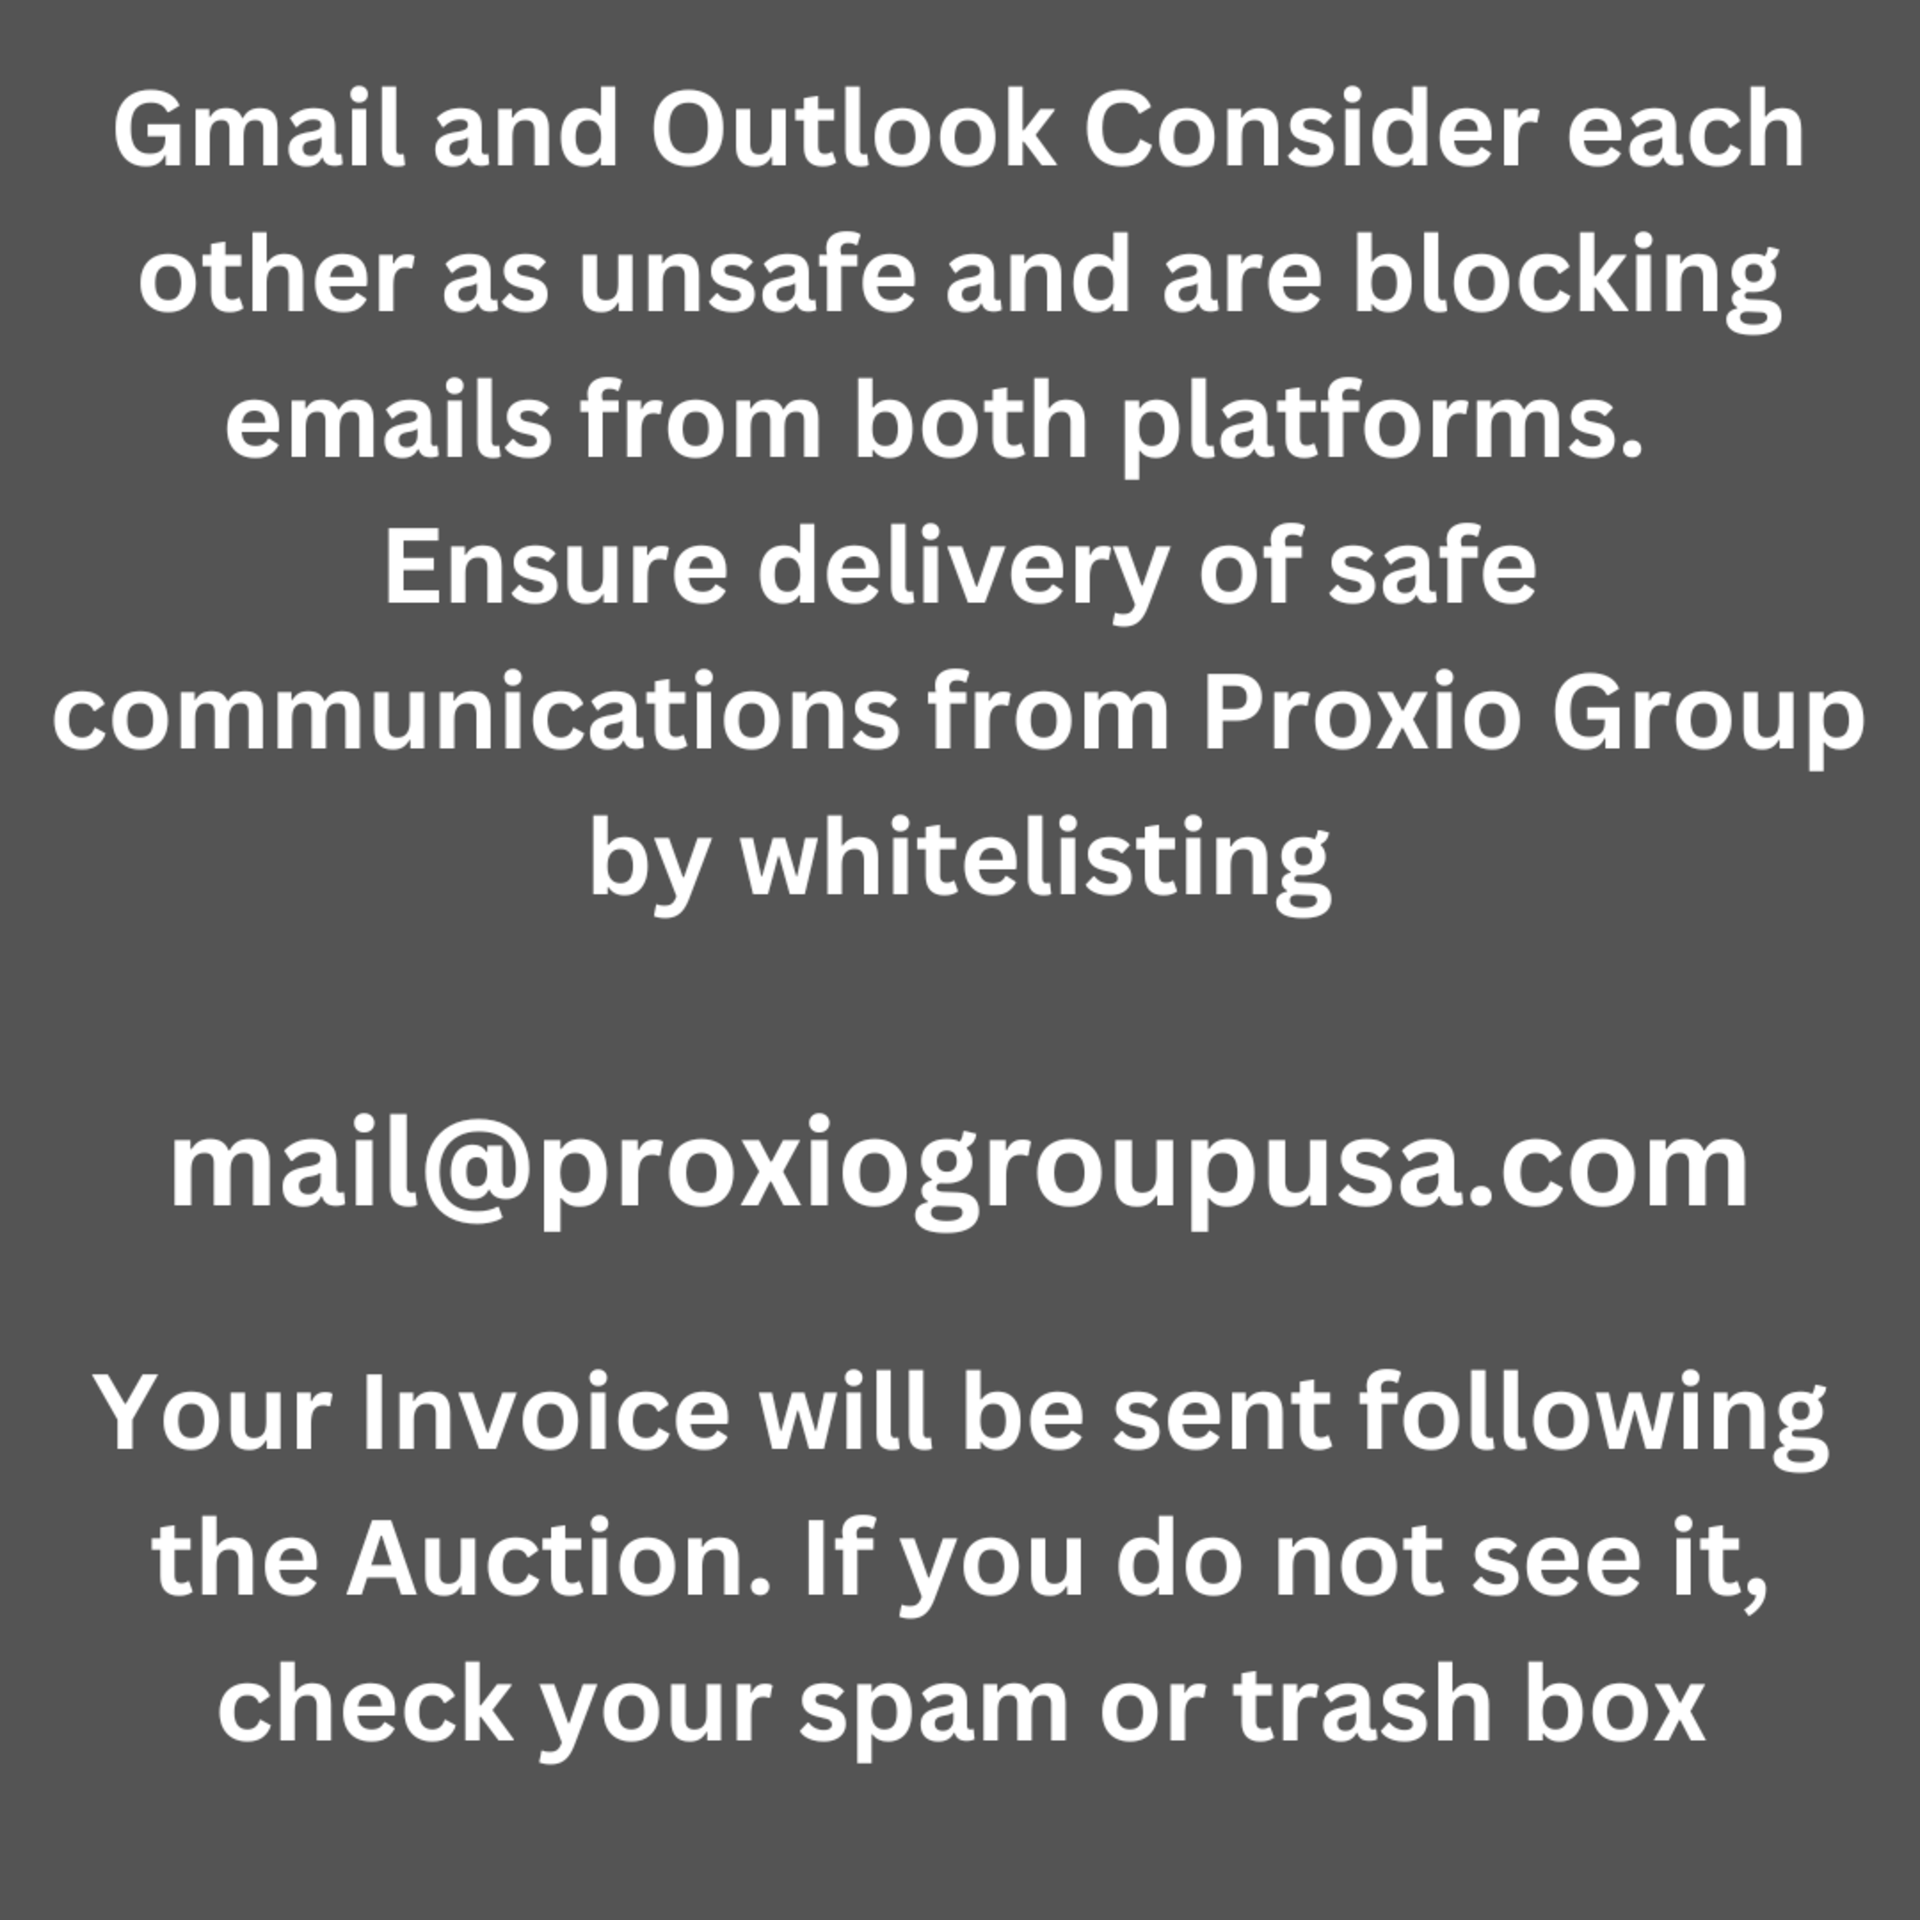 Invoices will be sent after the auction - check your spam folder - white list mail@proxiogroup.com